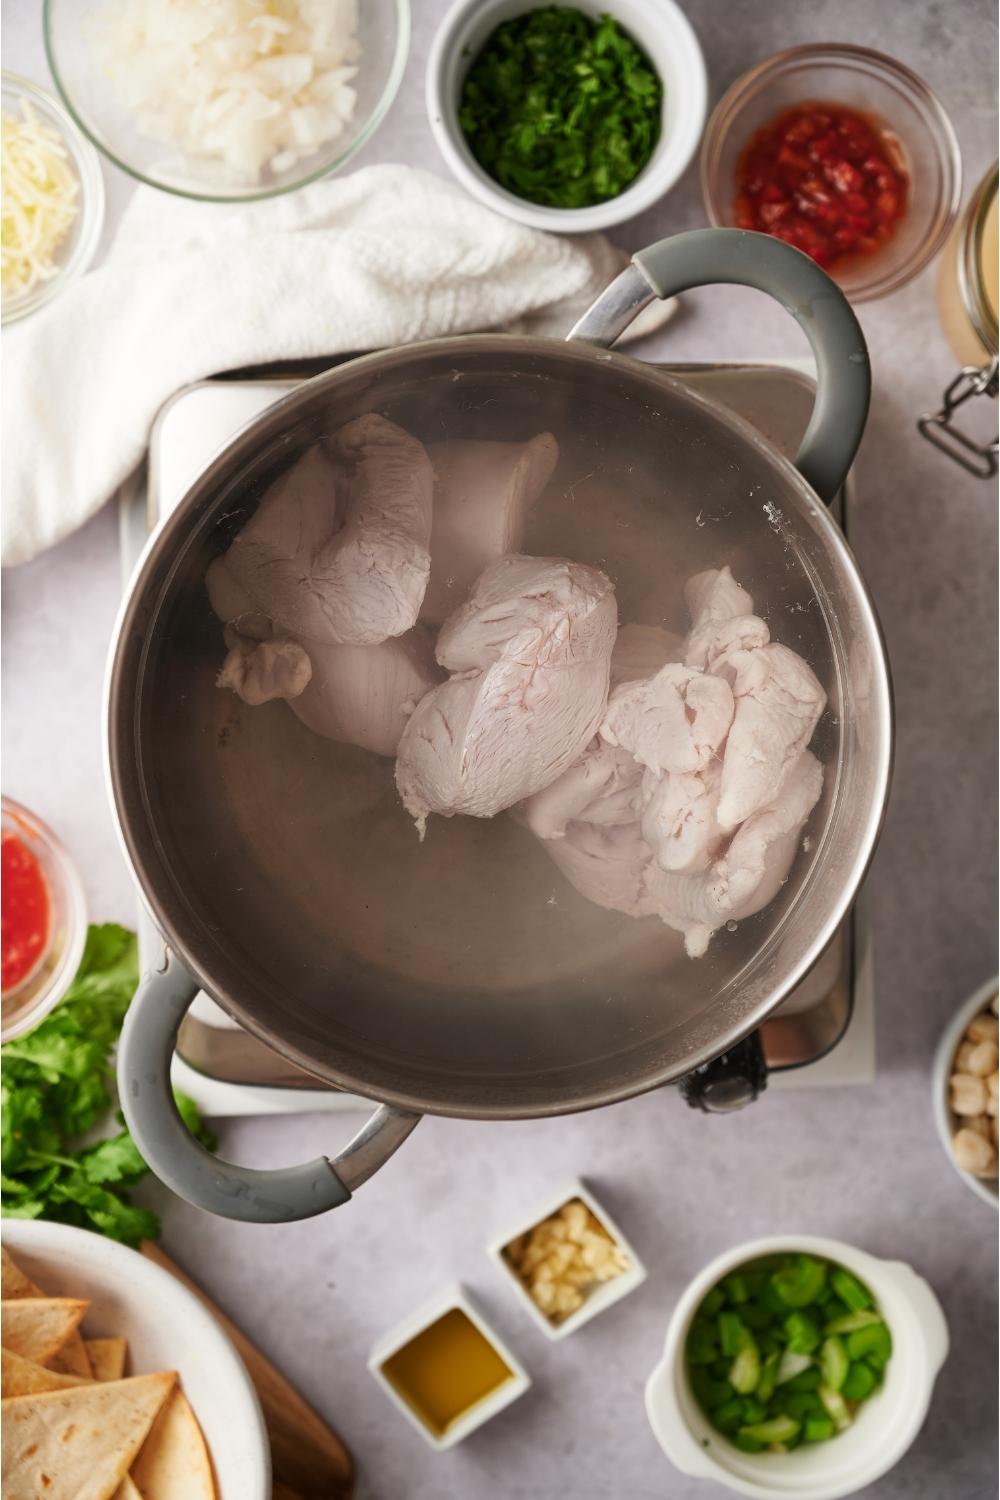 A pot of boiled chicken with ingredients to make southwest chicken soup including bowls of garlic, green chilis, and onion.